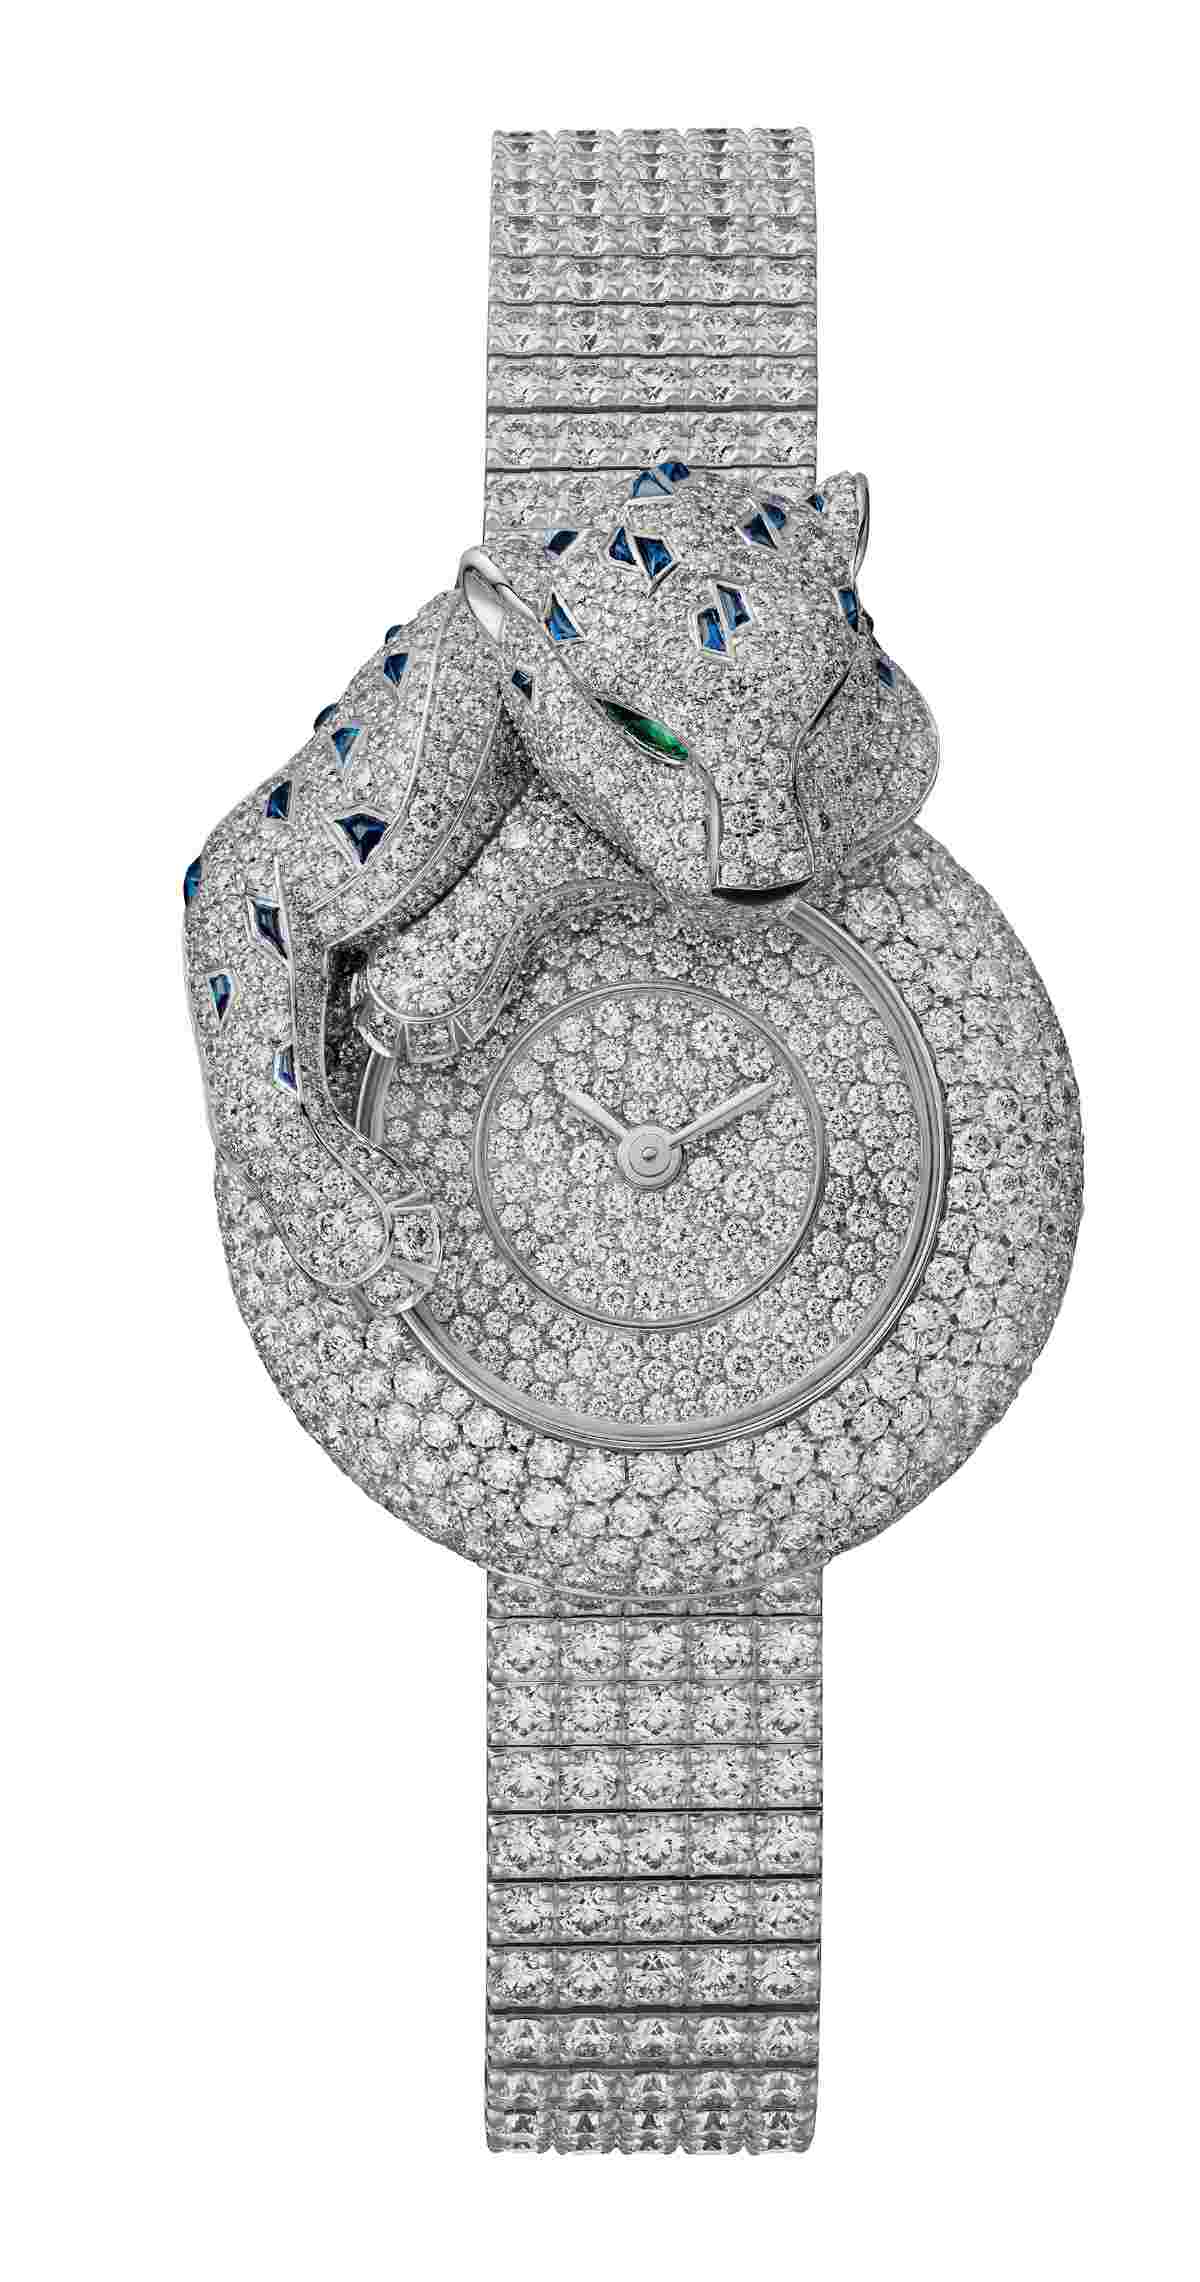 Pre-Watches & Wonders 2021: Cartier's Precious Watches